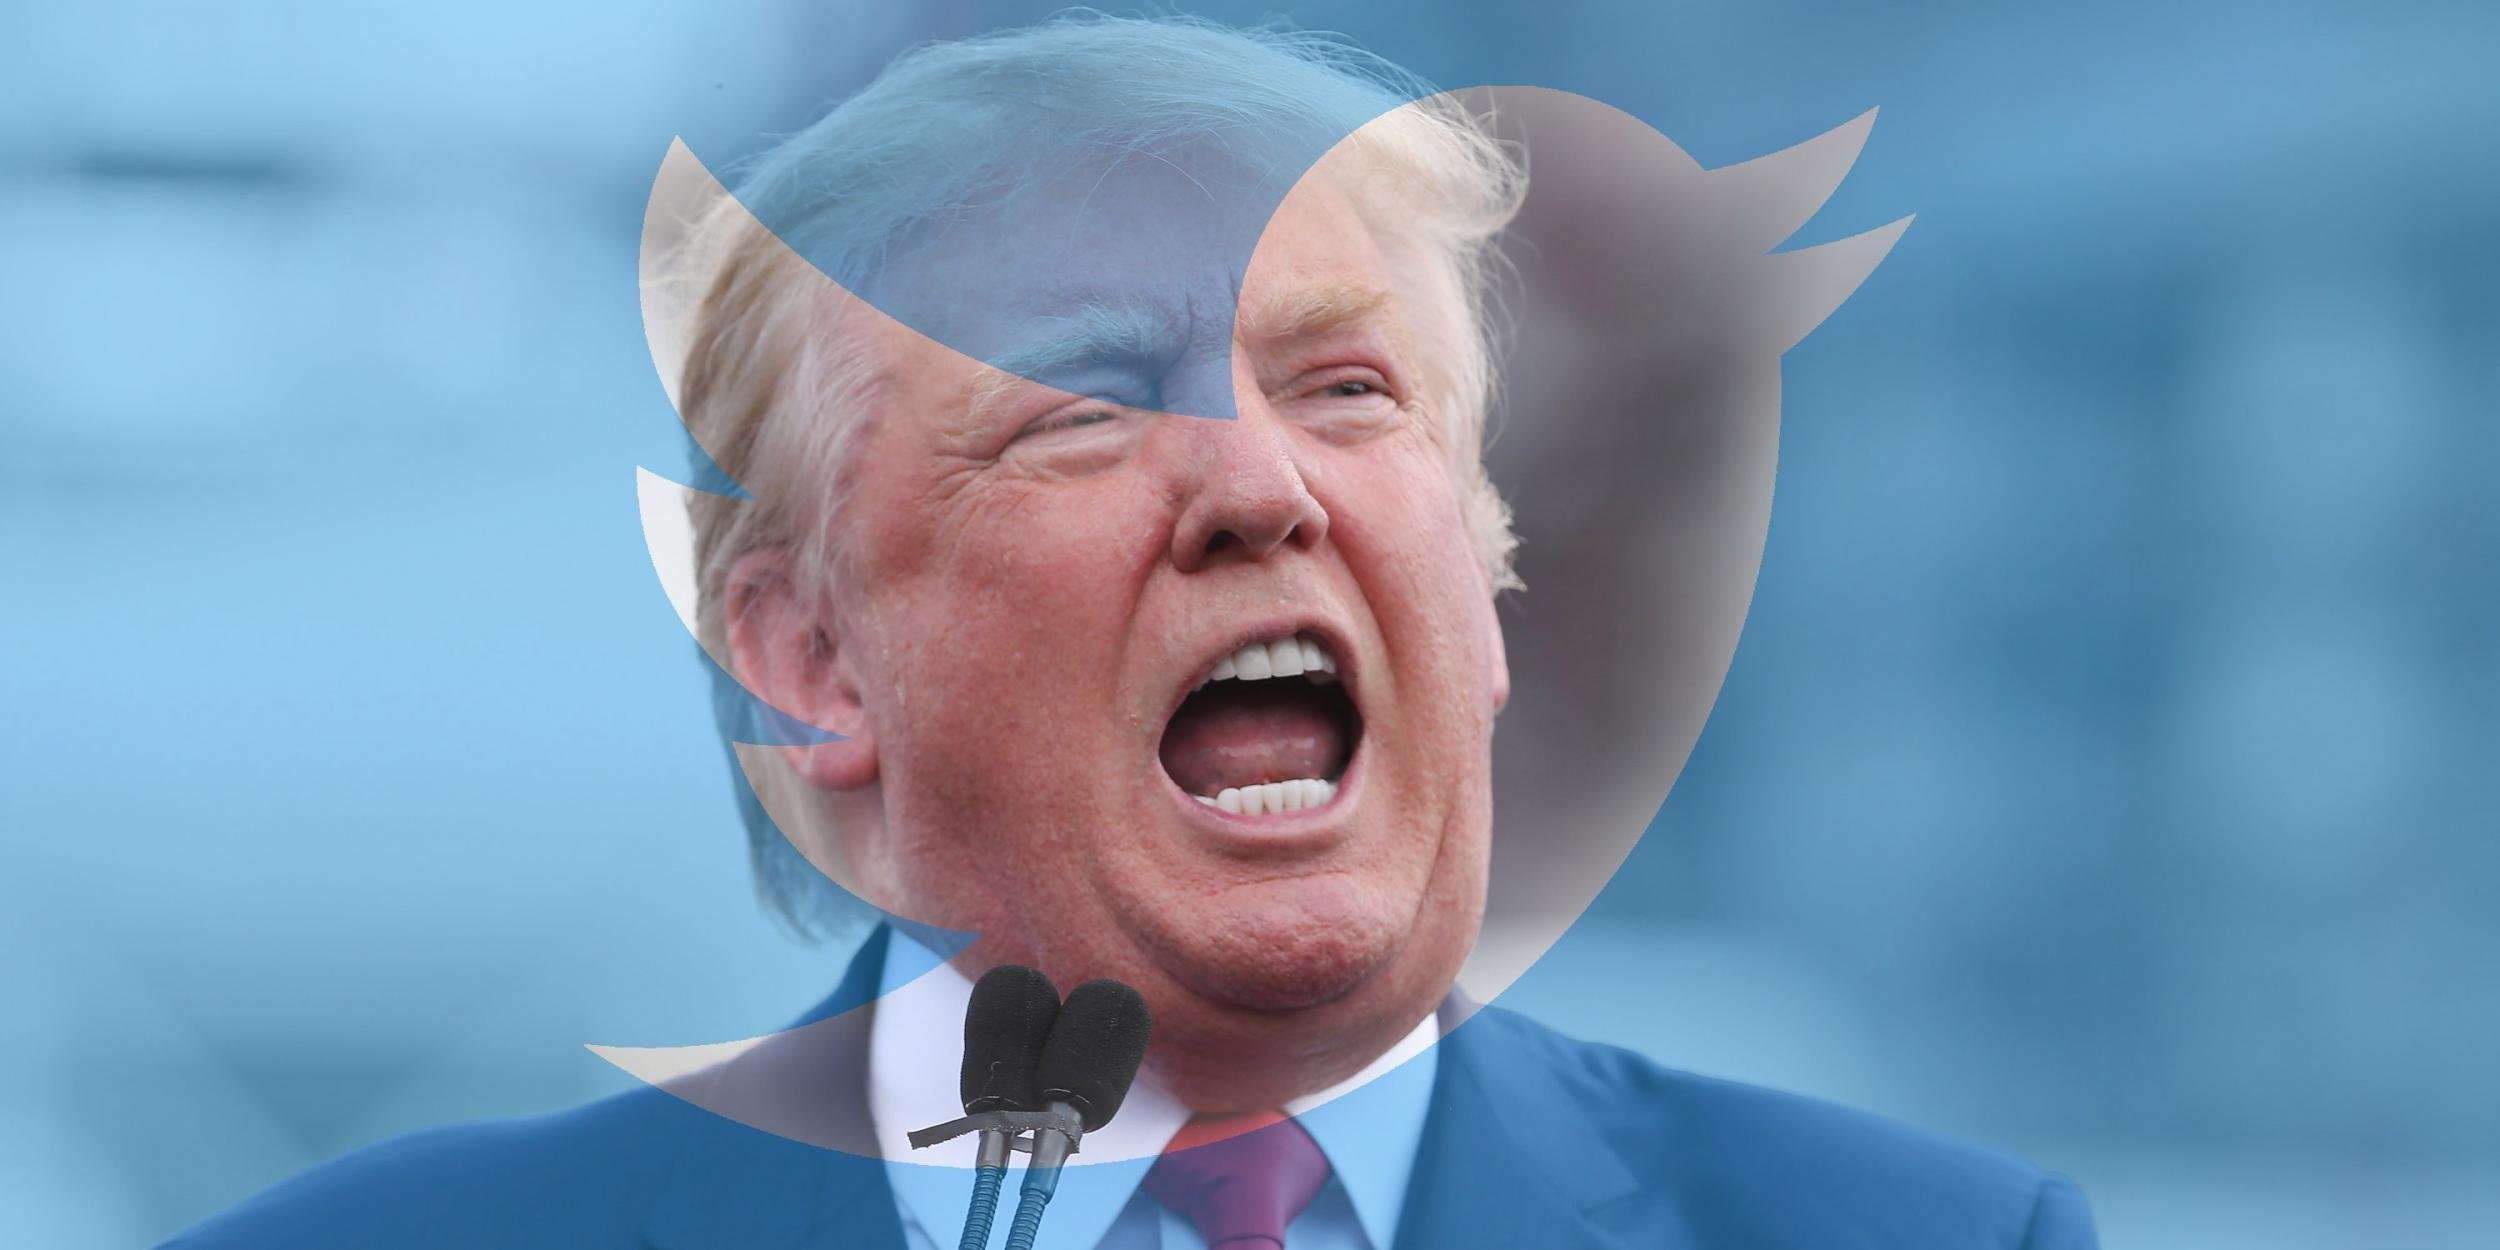 image for The internet has nominated the Twitter employee who shut down Trump's account for a Nobel Peace Prize